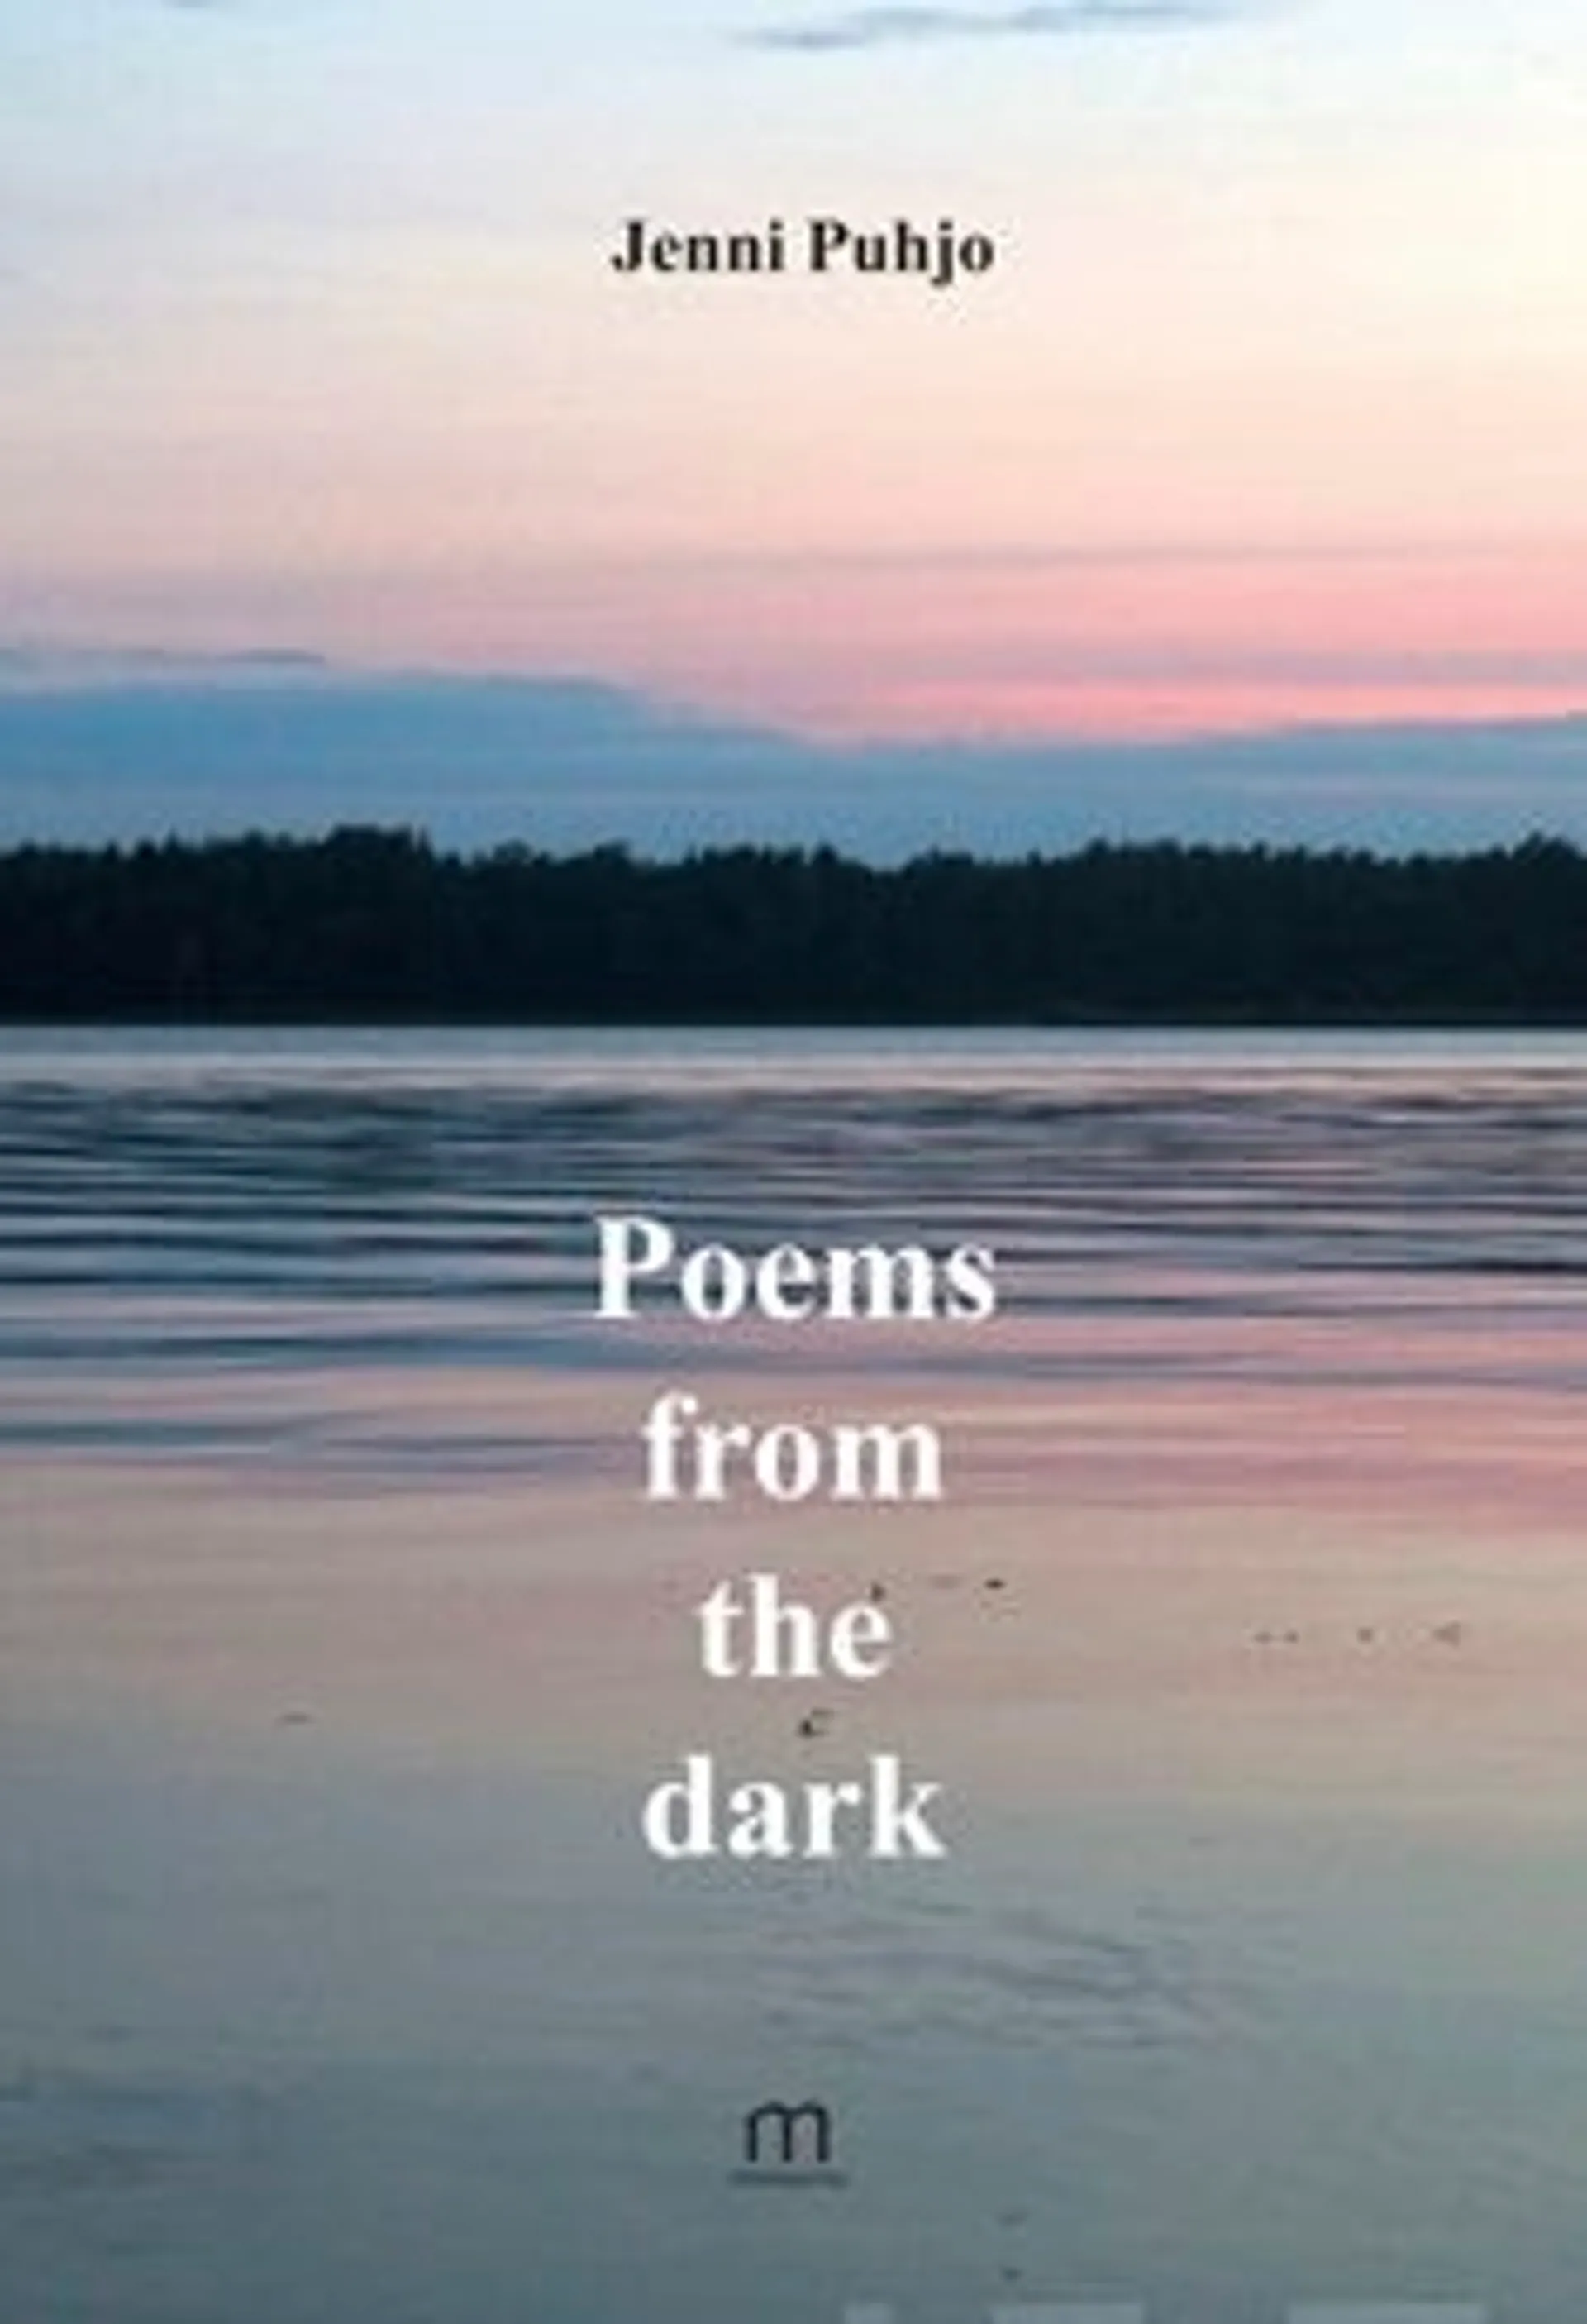 Puhjo, Poems from the dark